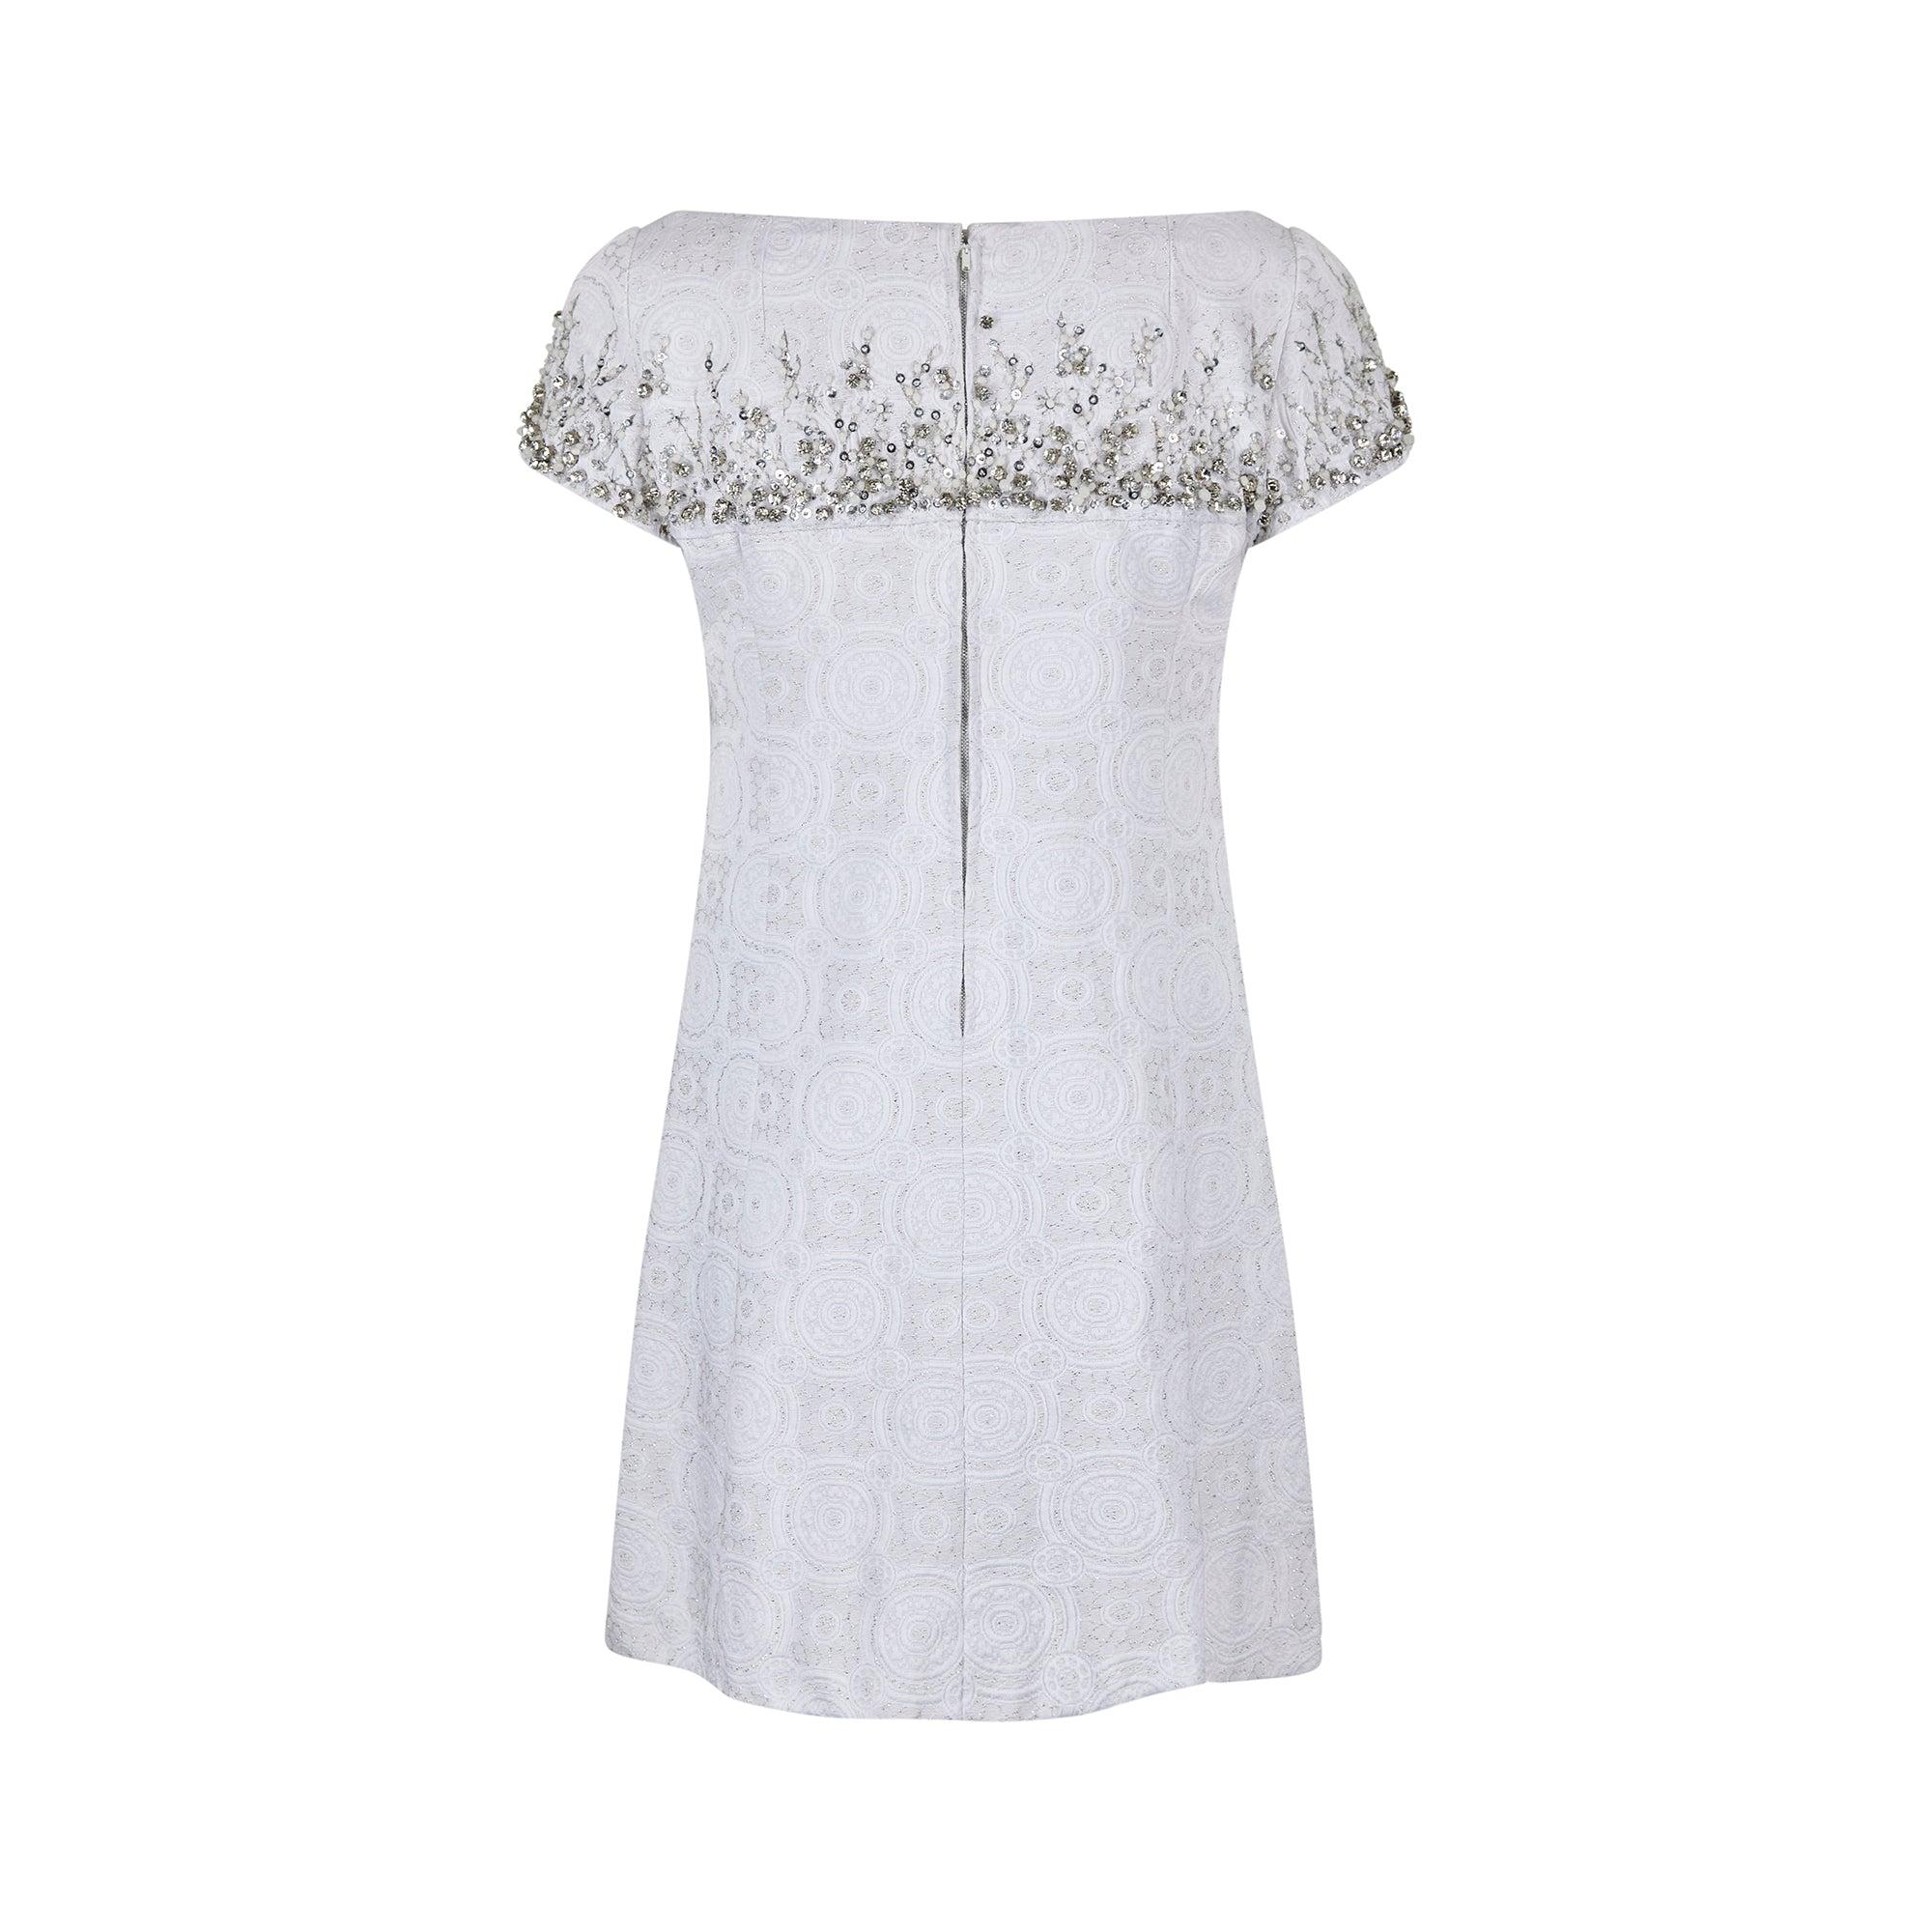 1960s Malcolm Starr Diamante White and Silver Weave Dress In Excellent Condition For Sale In London, GB